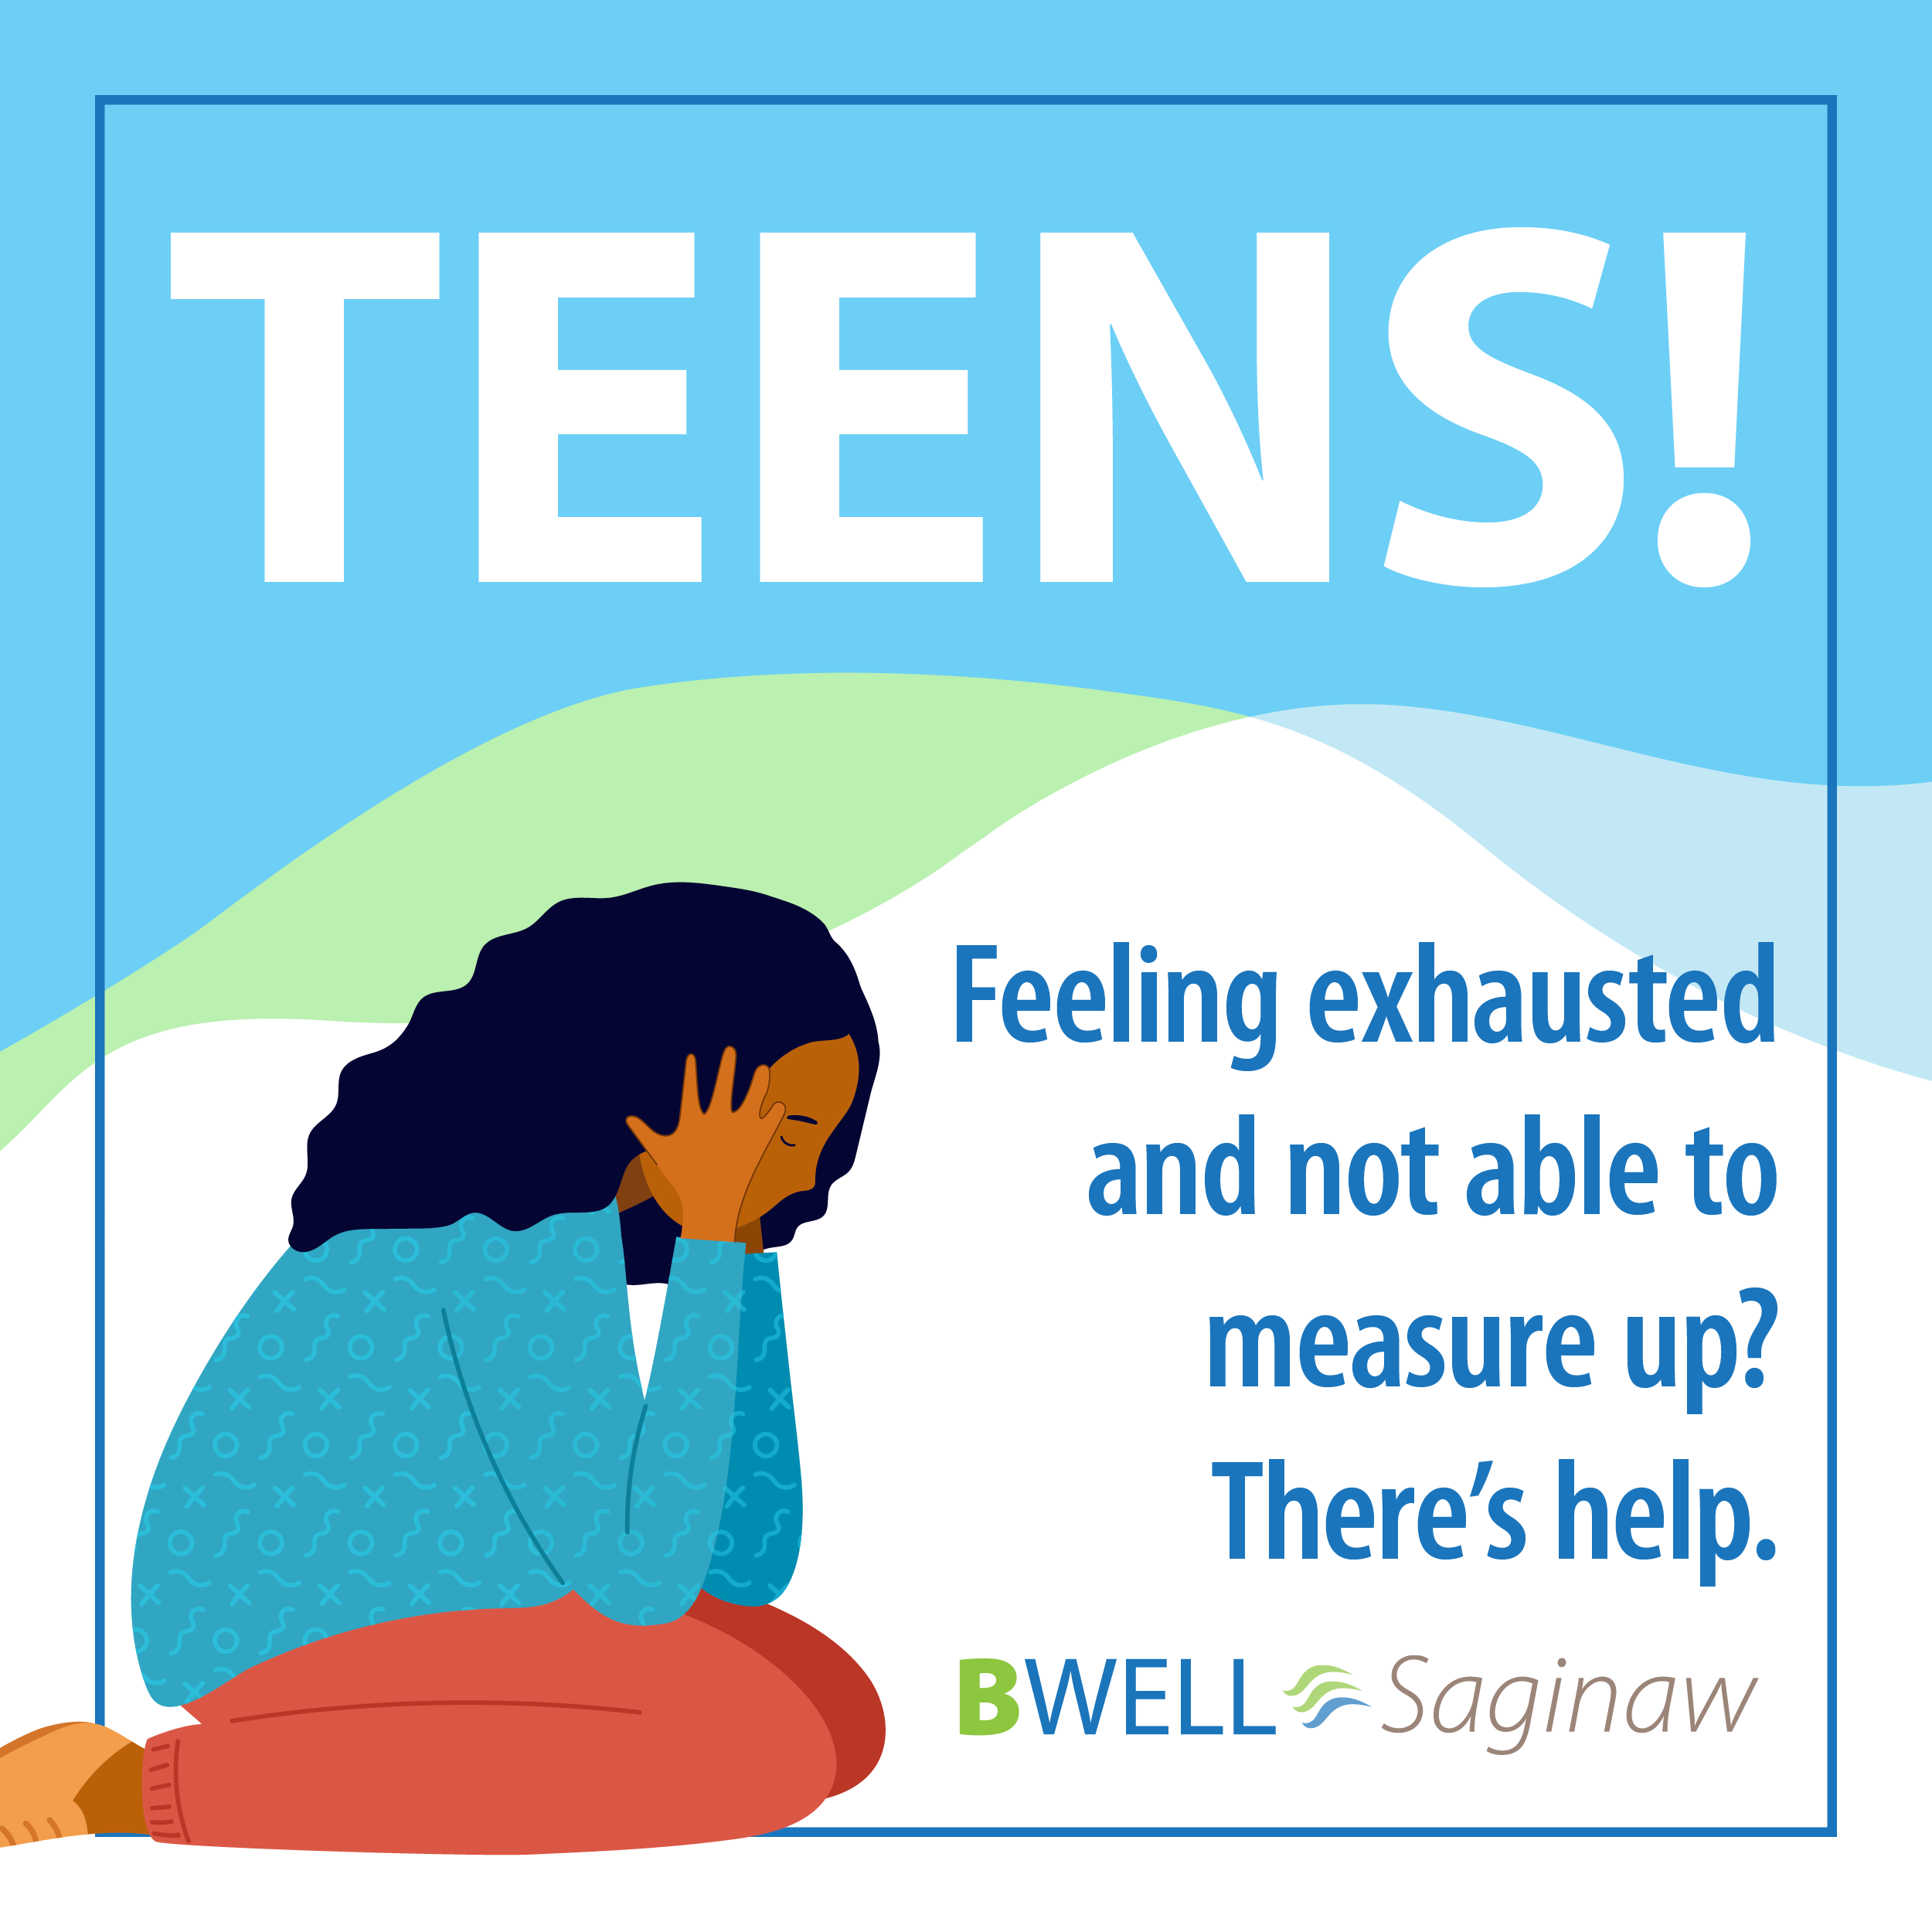 #2: Teens: Feeling exhausted and not able to measure up?